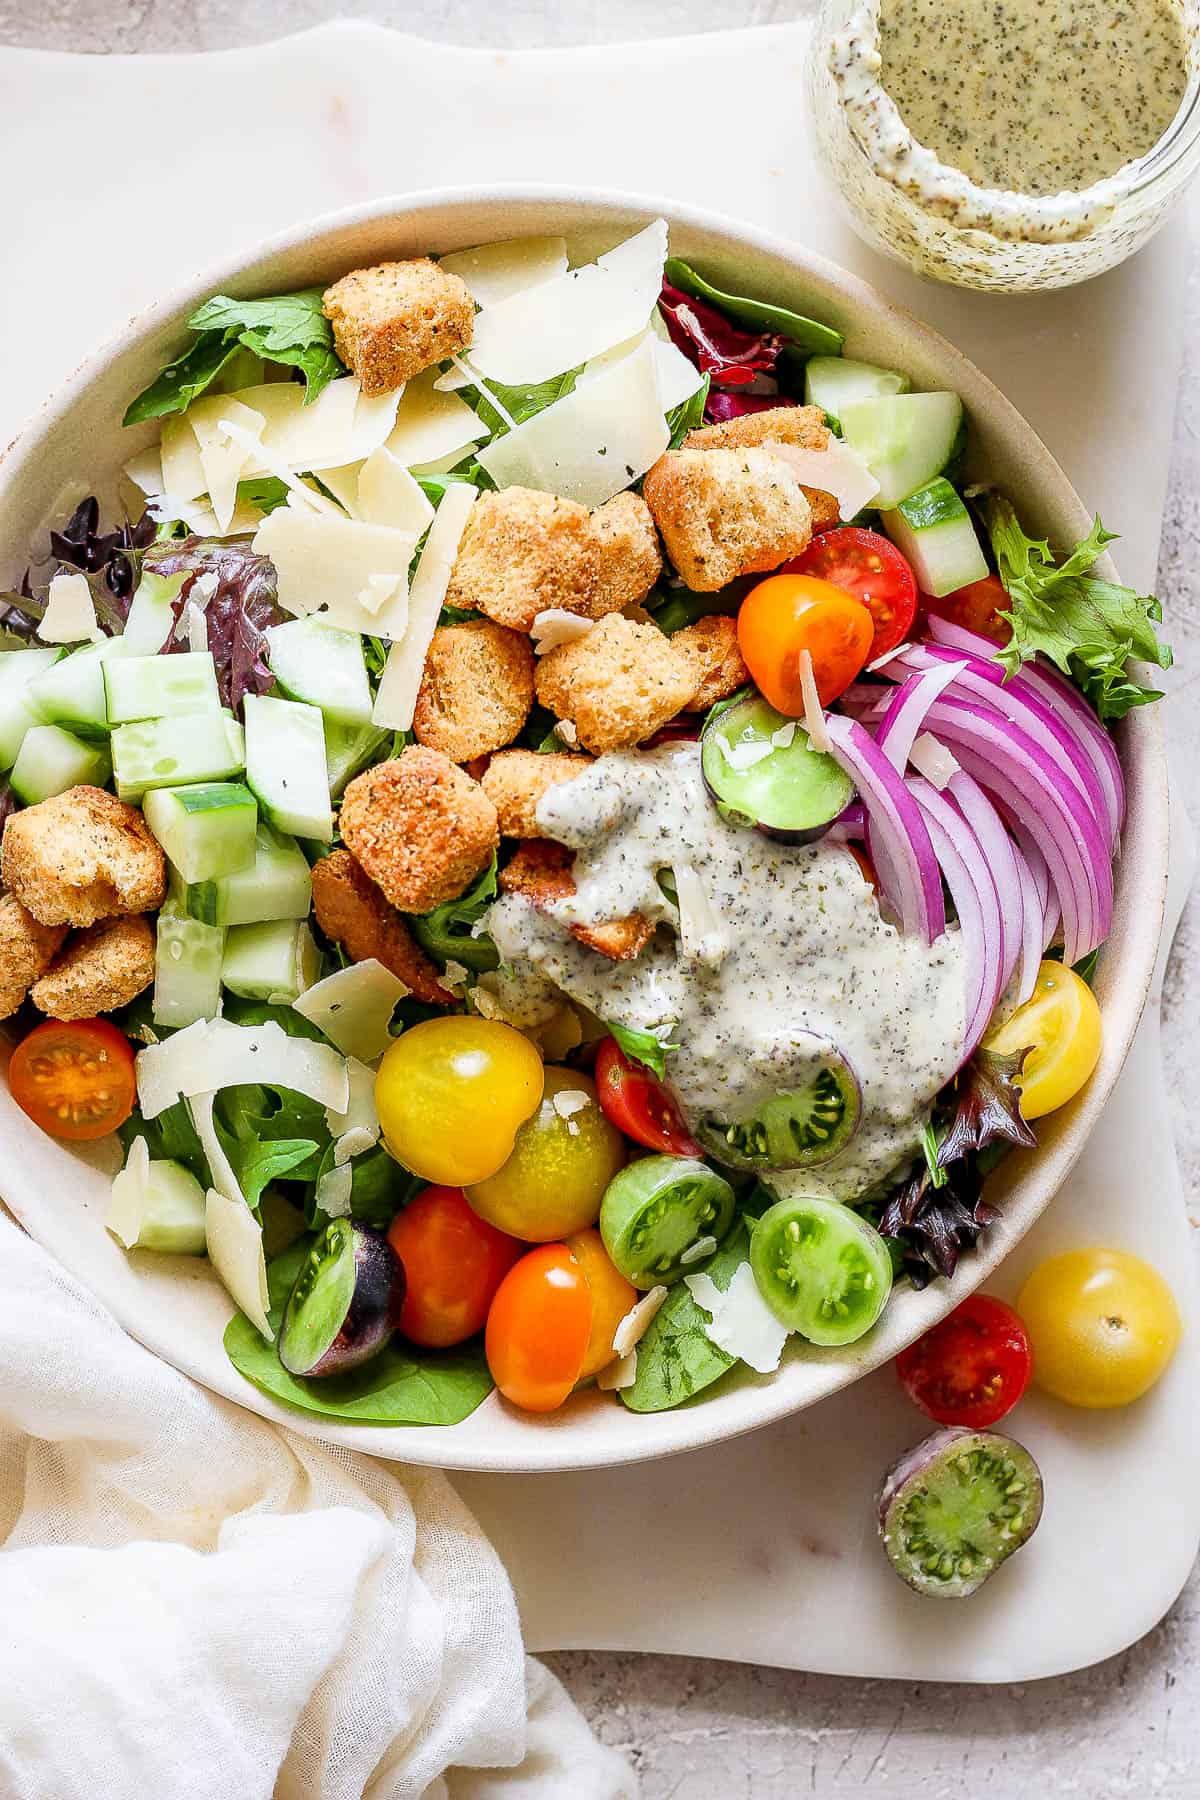 A large house salad in a white bowl with the homemade dressing on top.